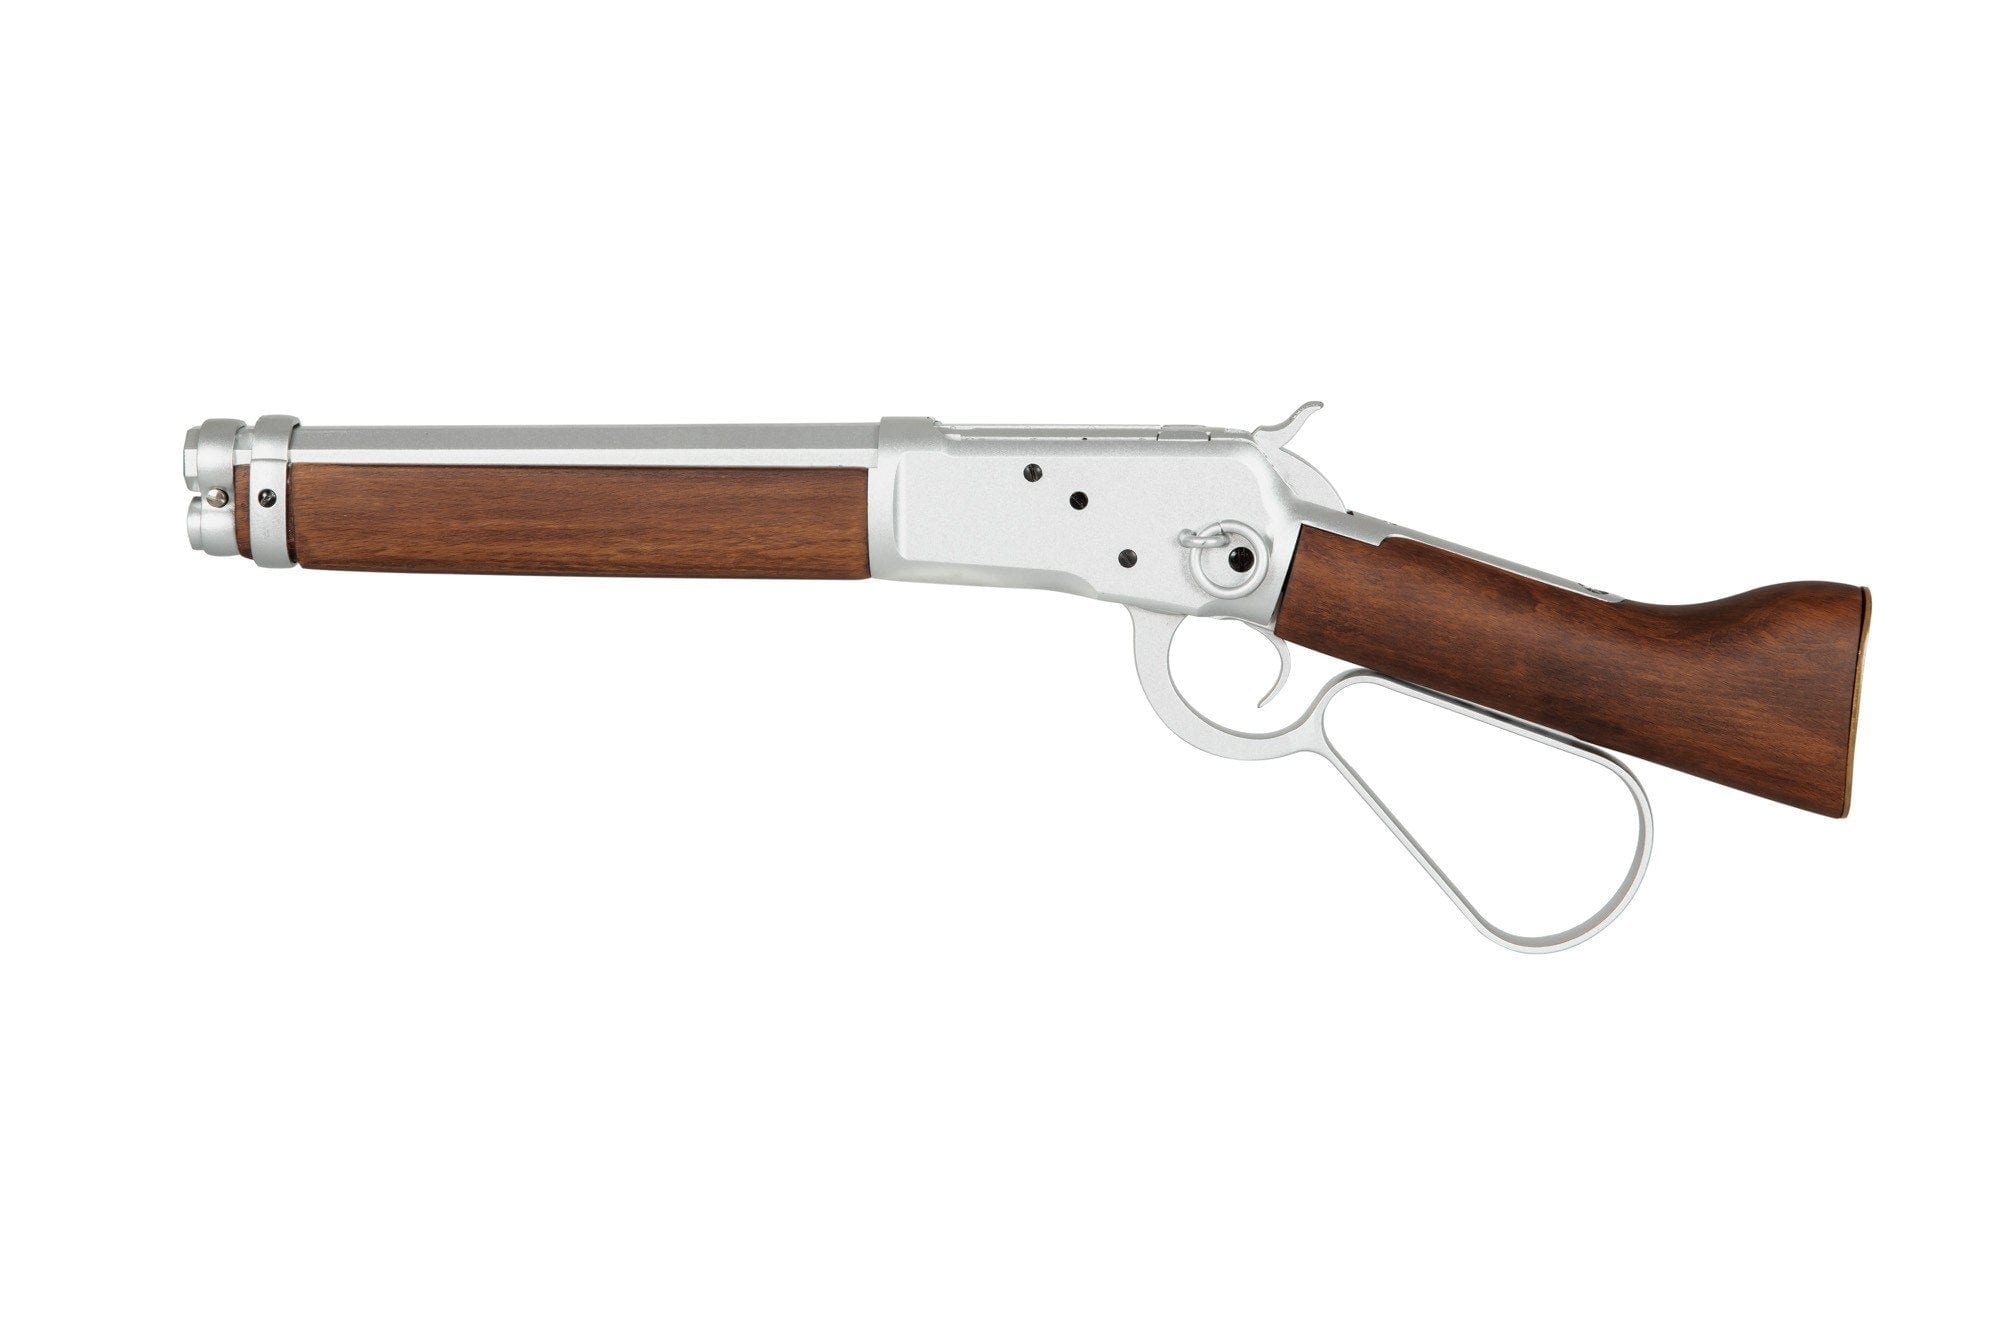 1873 (Real Wood) Rifle Replica - silver